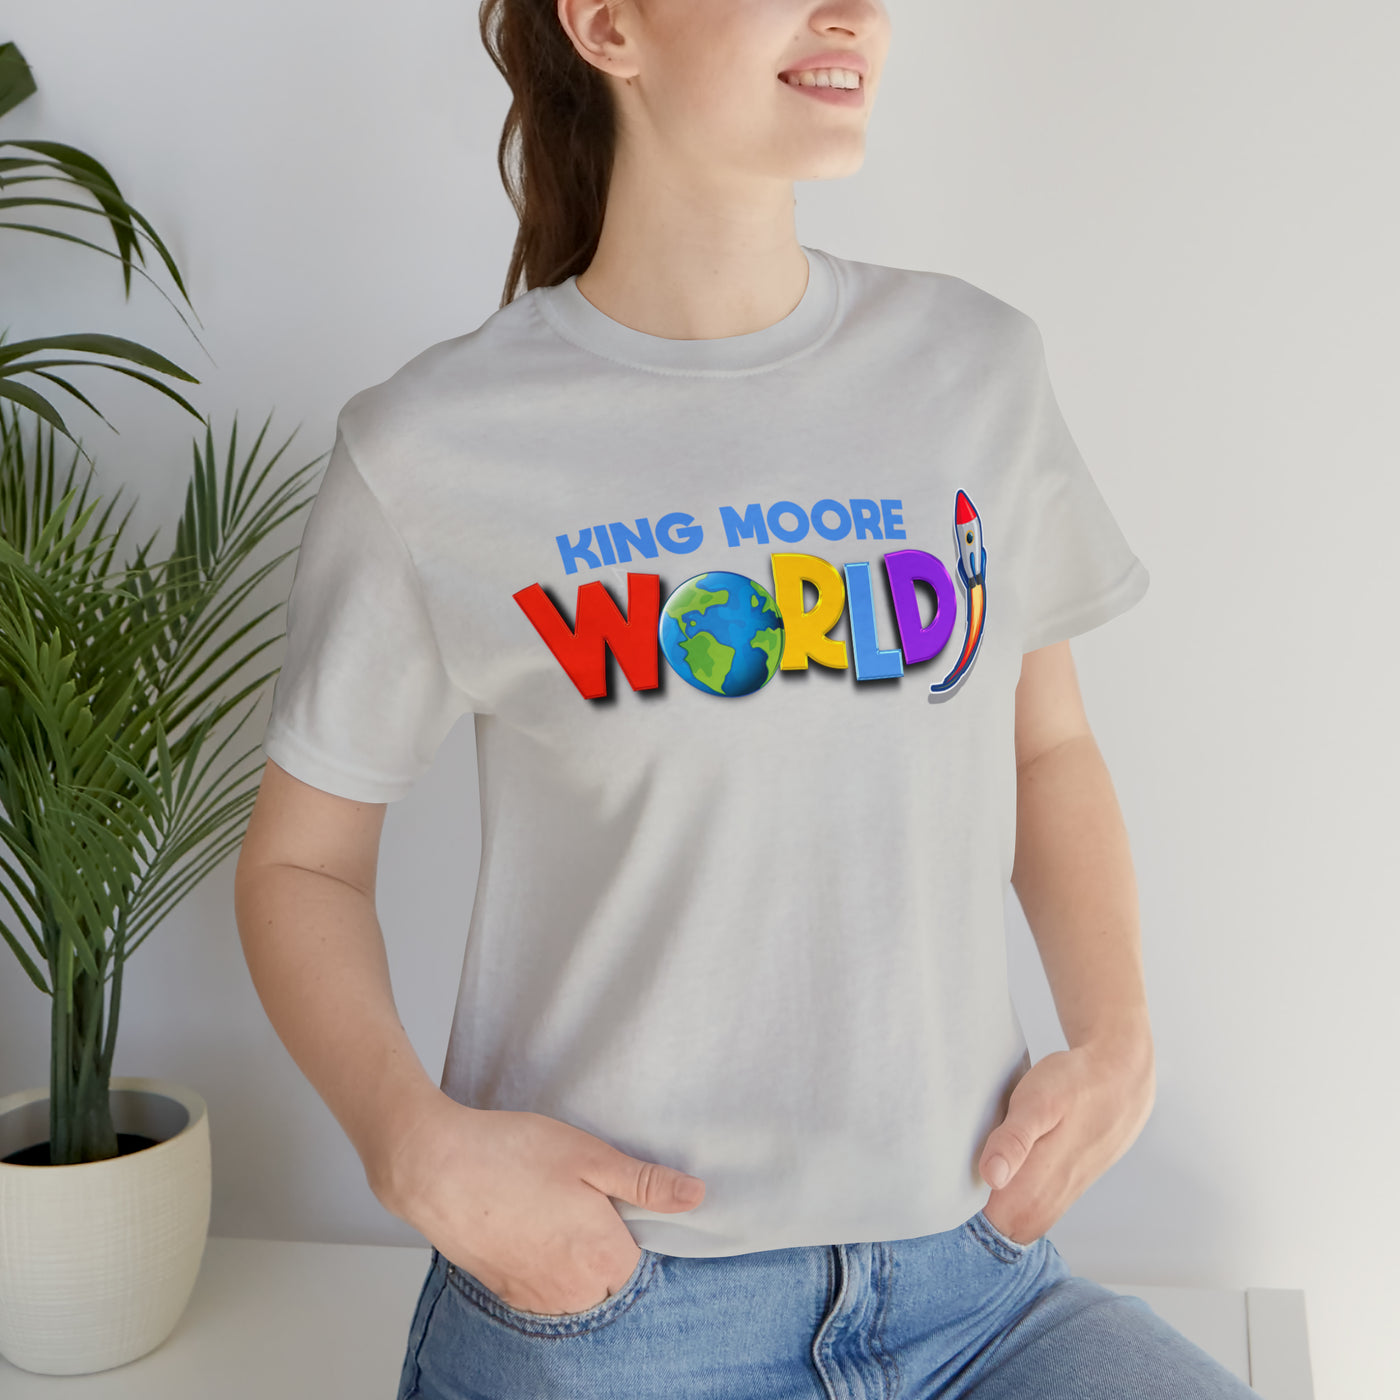 King Moore World Adult Unisex Tee (12Colors) - Blue Name